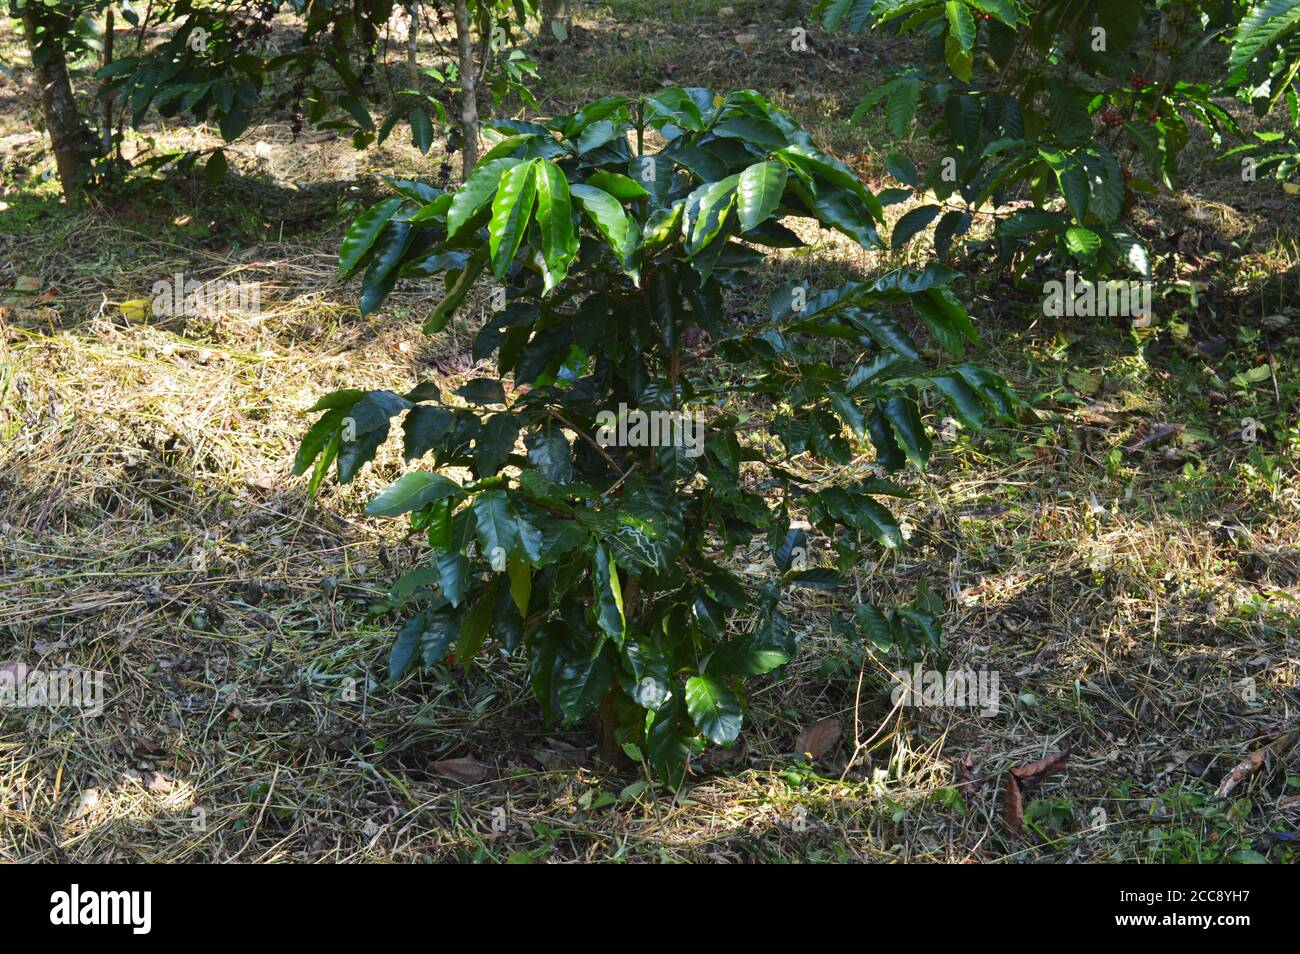 Coffea is a genus of flowering plants in the family Rubiaceae. Coffea species are shrubs or small trees native to tropical and southern Africa. Stock Photo